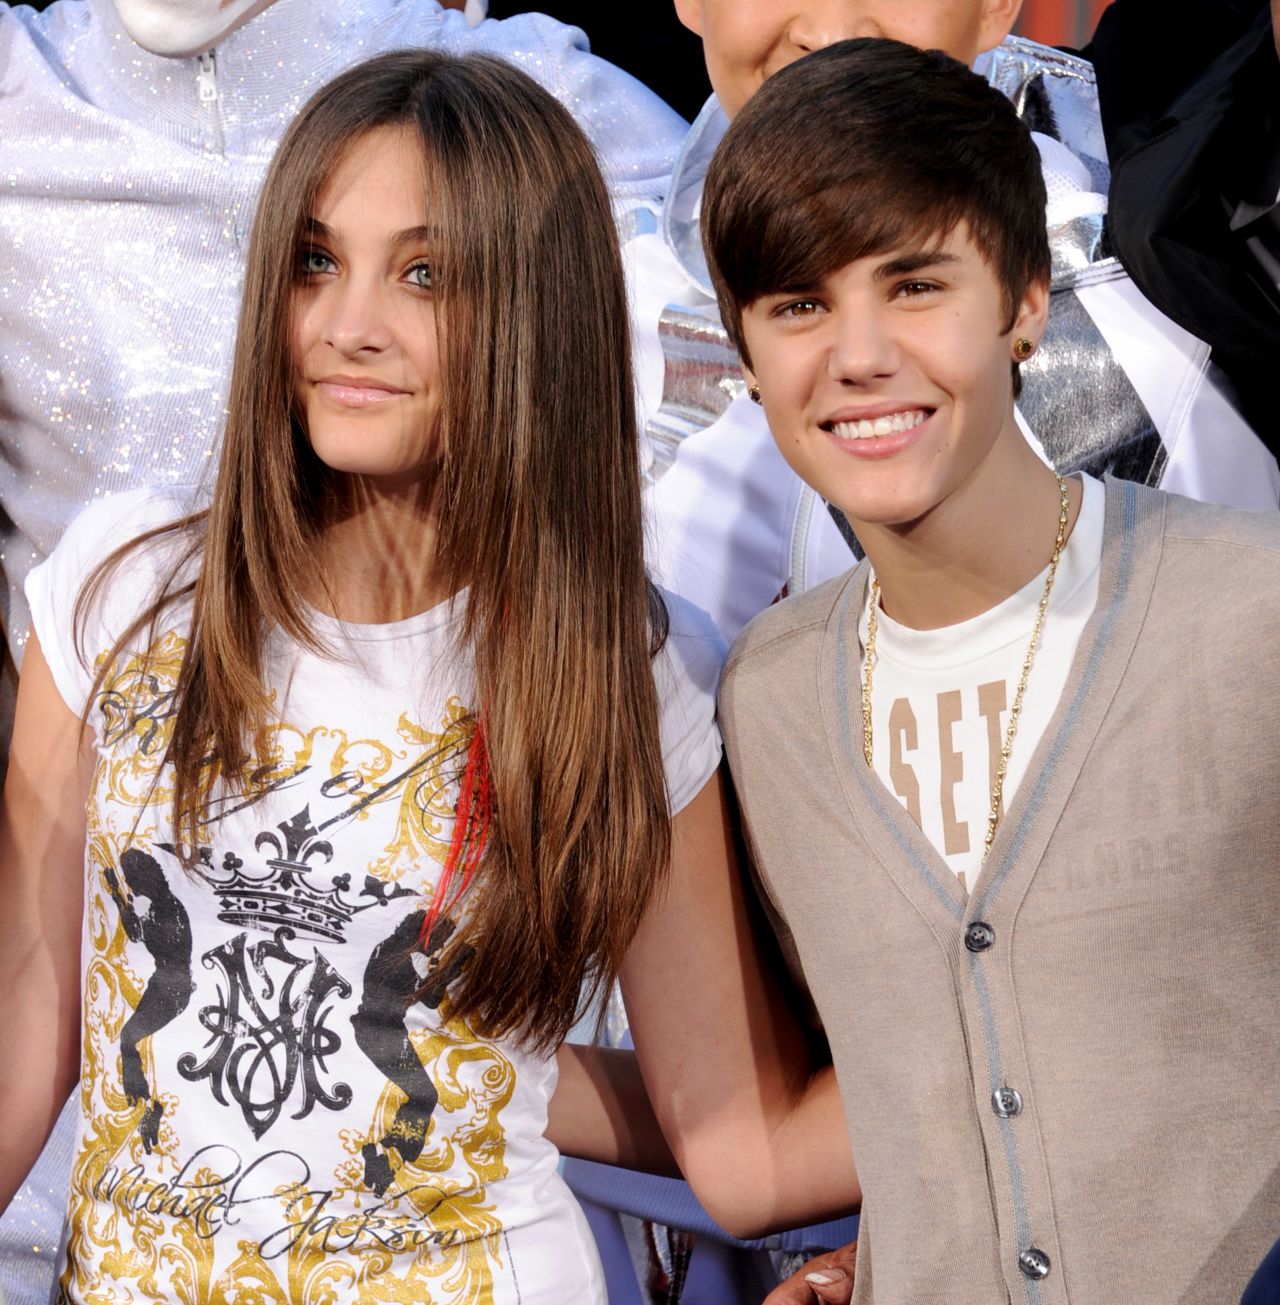 Bieber had some of the "<a href="http://marquee.blogs.cnn.com/2011/12/29/emma-watson-bieber-boast-2011s-most-influential-hair/?iref=allsearch">most influential hair</a>" of 2011 and also was ranked as <a href="http://marquee.blogs.cnn.com/2011/12/27/gaga-bieber-are-most-charitable-celebs-of-2011/?iref=allsearch">one of the most charitable stars</a>. Here, he showed off his style with Paris Jackson at the Michael Jackson hand and footprint ceremony at Grauman's Chinese Theatre in Los Angeles.